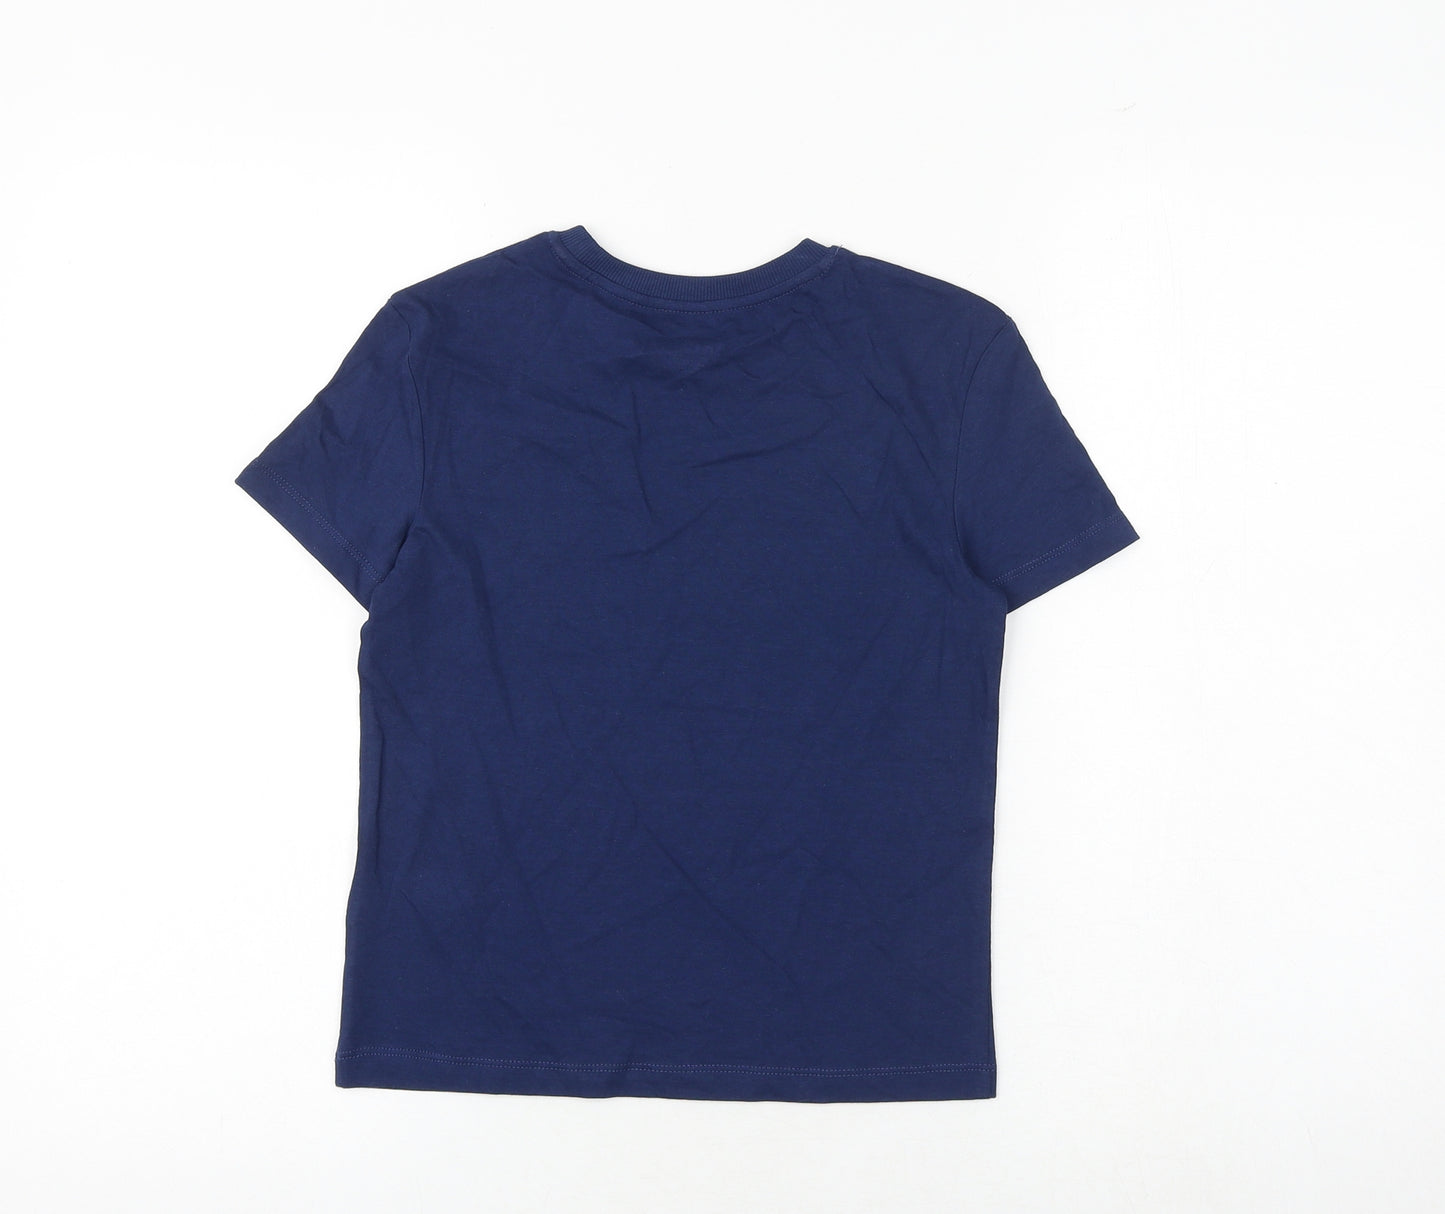 Marks and Spencer Boys Blue Cotton Basic T-Shirt Size 6-7 Years Round Neck Pullover - Today Is A Good Day